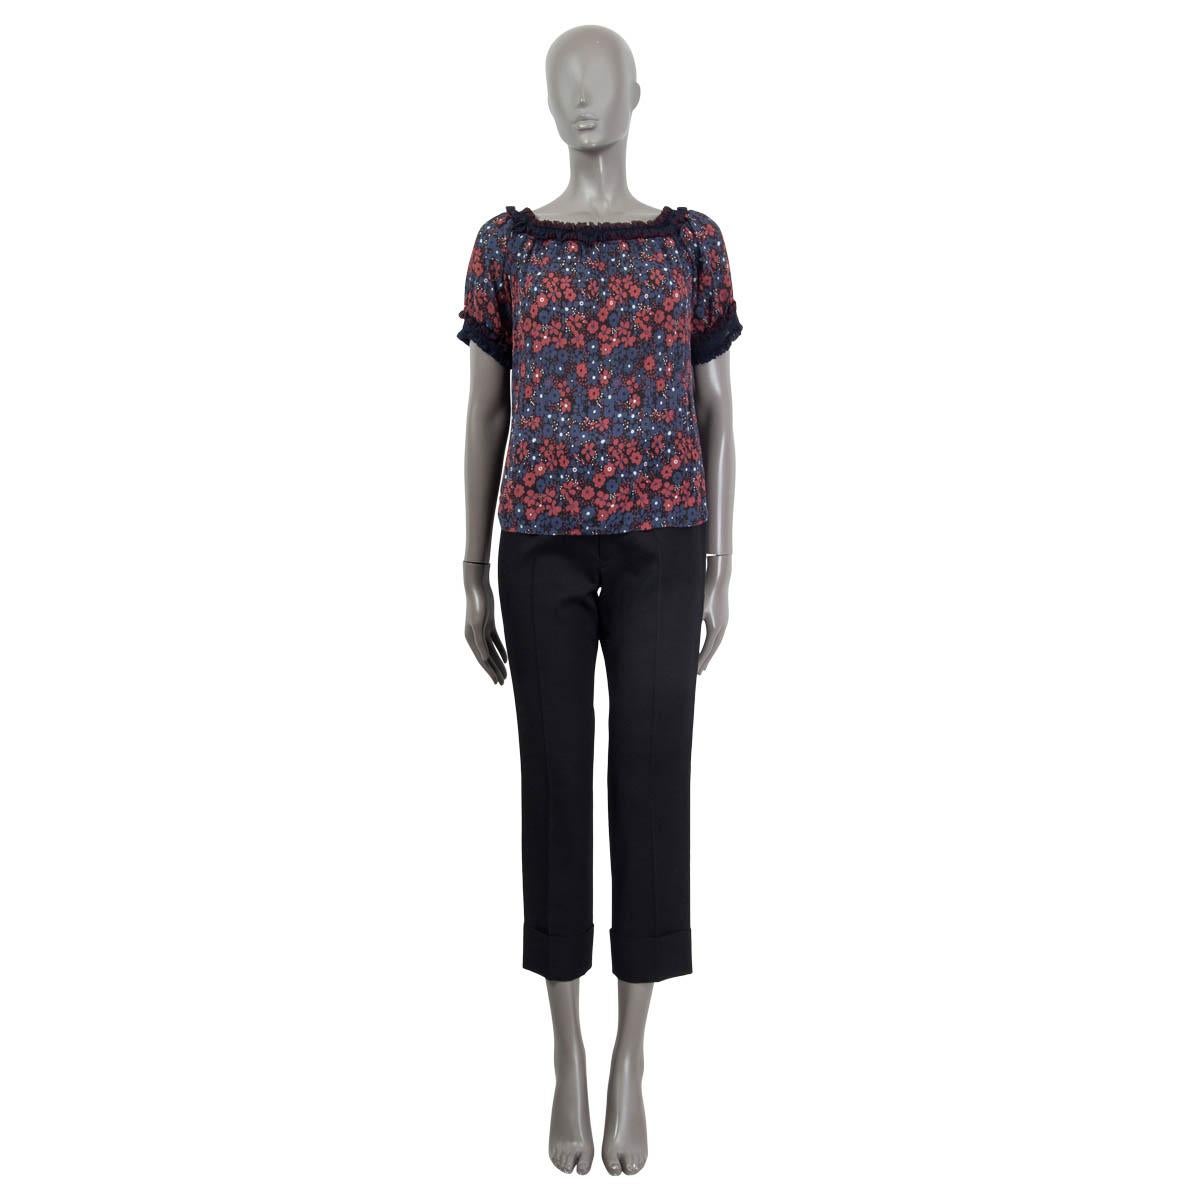 100% authentic Chloé ruched blouse in navy, burgundy, black and white cotton (65%) and silk (35%). Features short sleeves and a floral print. Unlined. Has been worn and is in excellent condition.

Measurements
Tag Size	34
Size	XXS
Bust	86cm (33.5in)